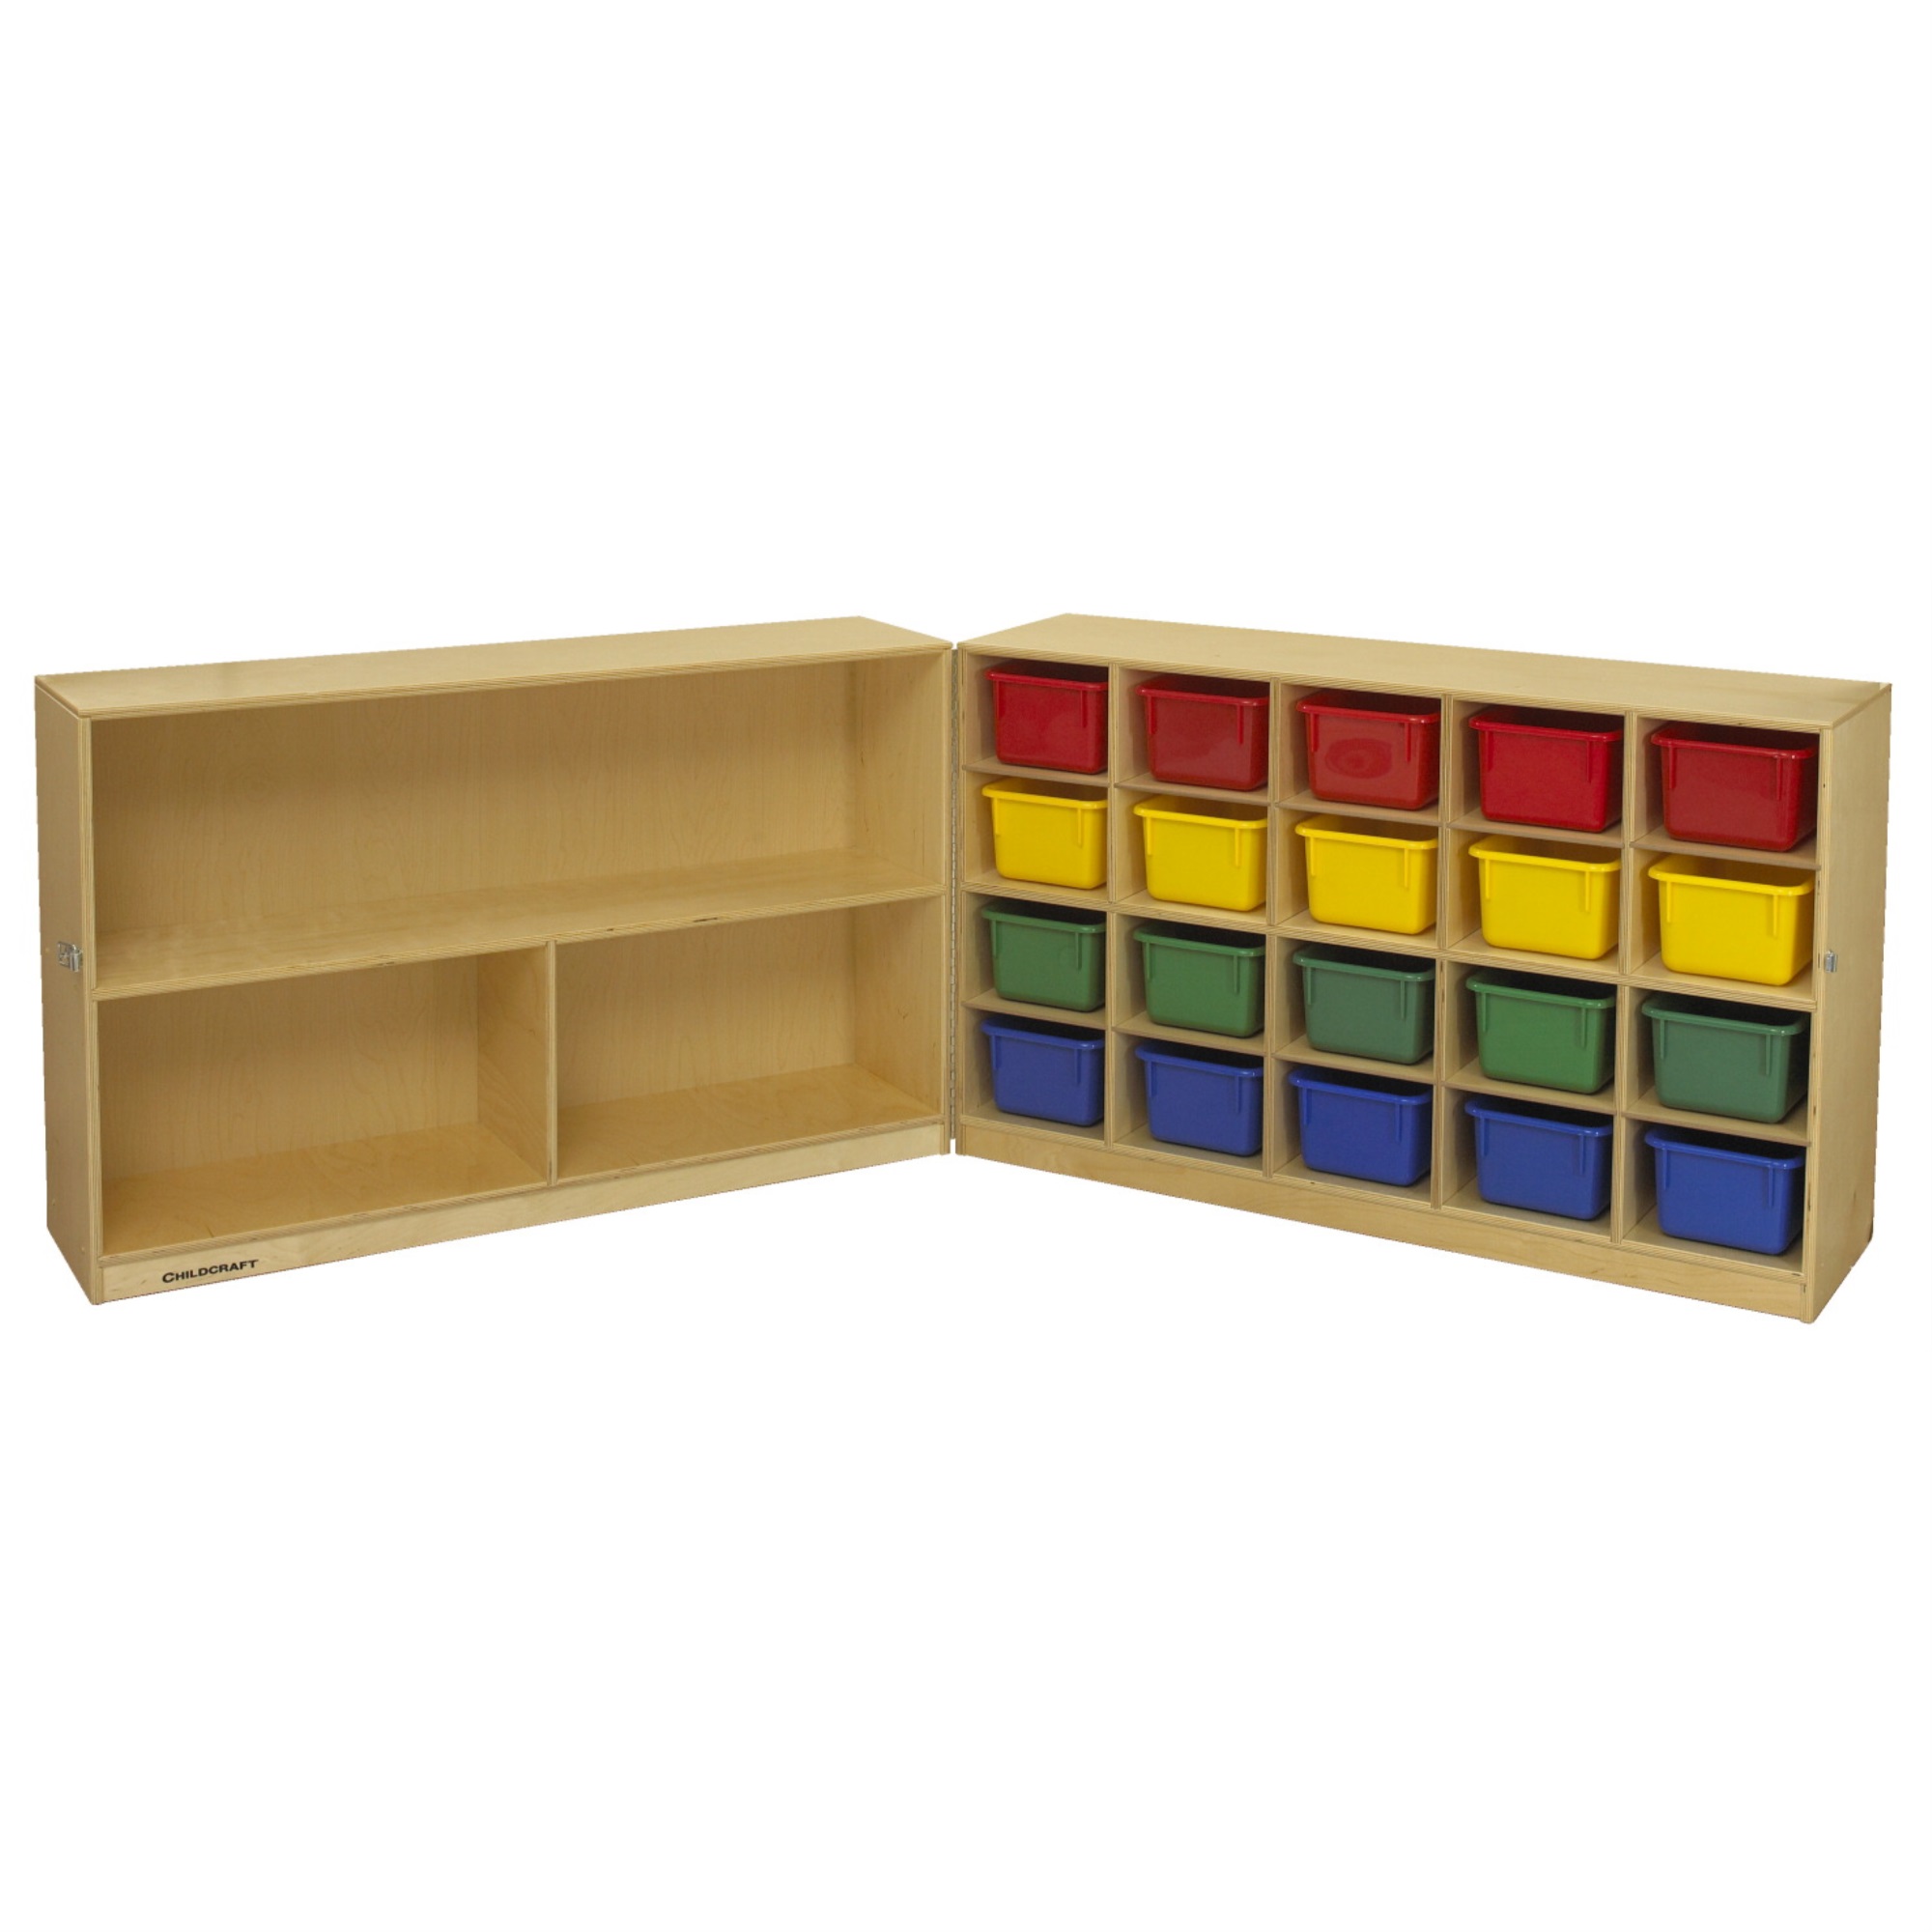 Childcraft Mobile Hide-Away Cabinet, 20 Assorted Color Trays, 47-3/4 x 26 x 30 Inches